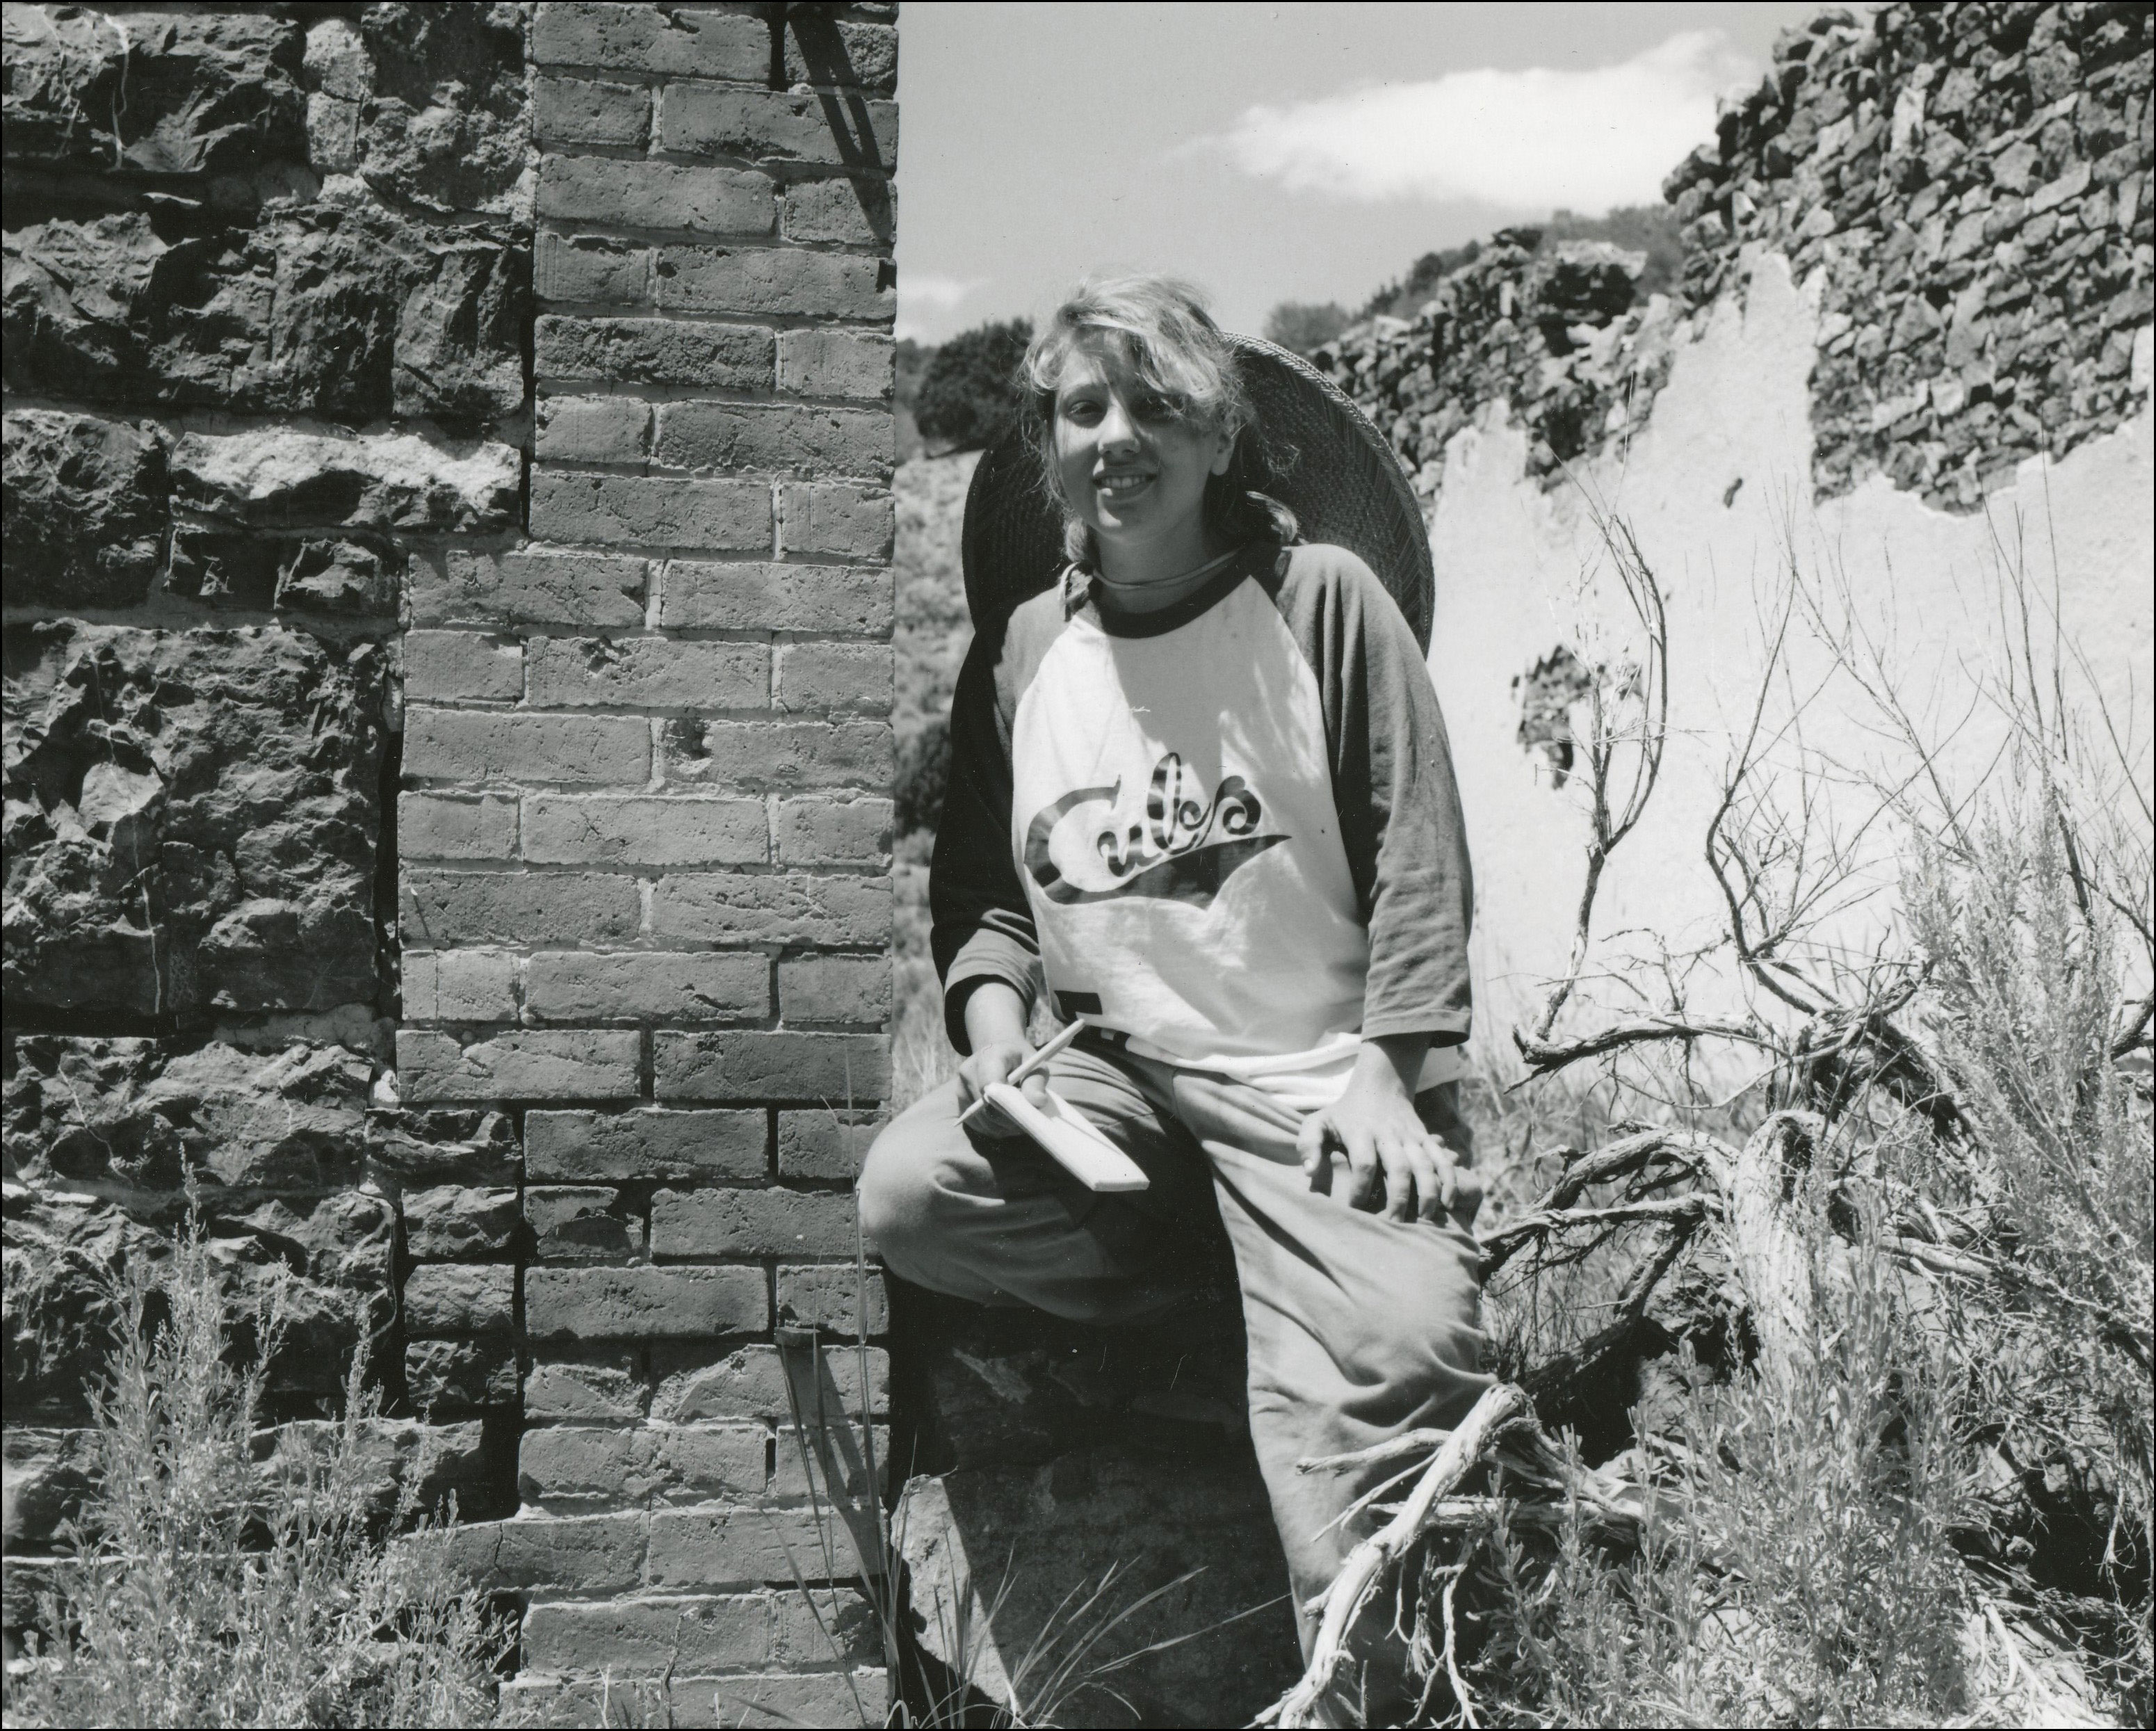 Young woman with Cubs shirt, notepad and pen leaning with one leg up against historical brick building